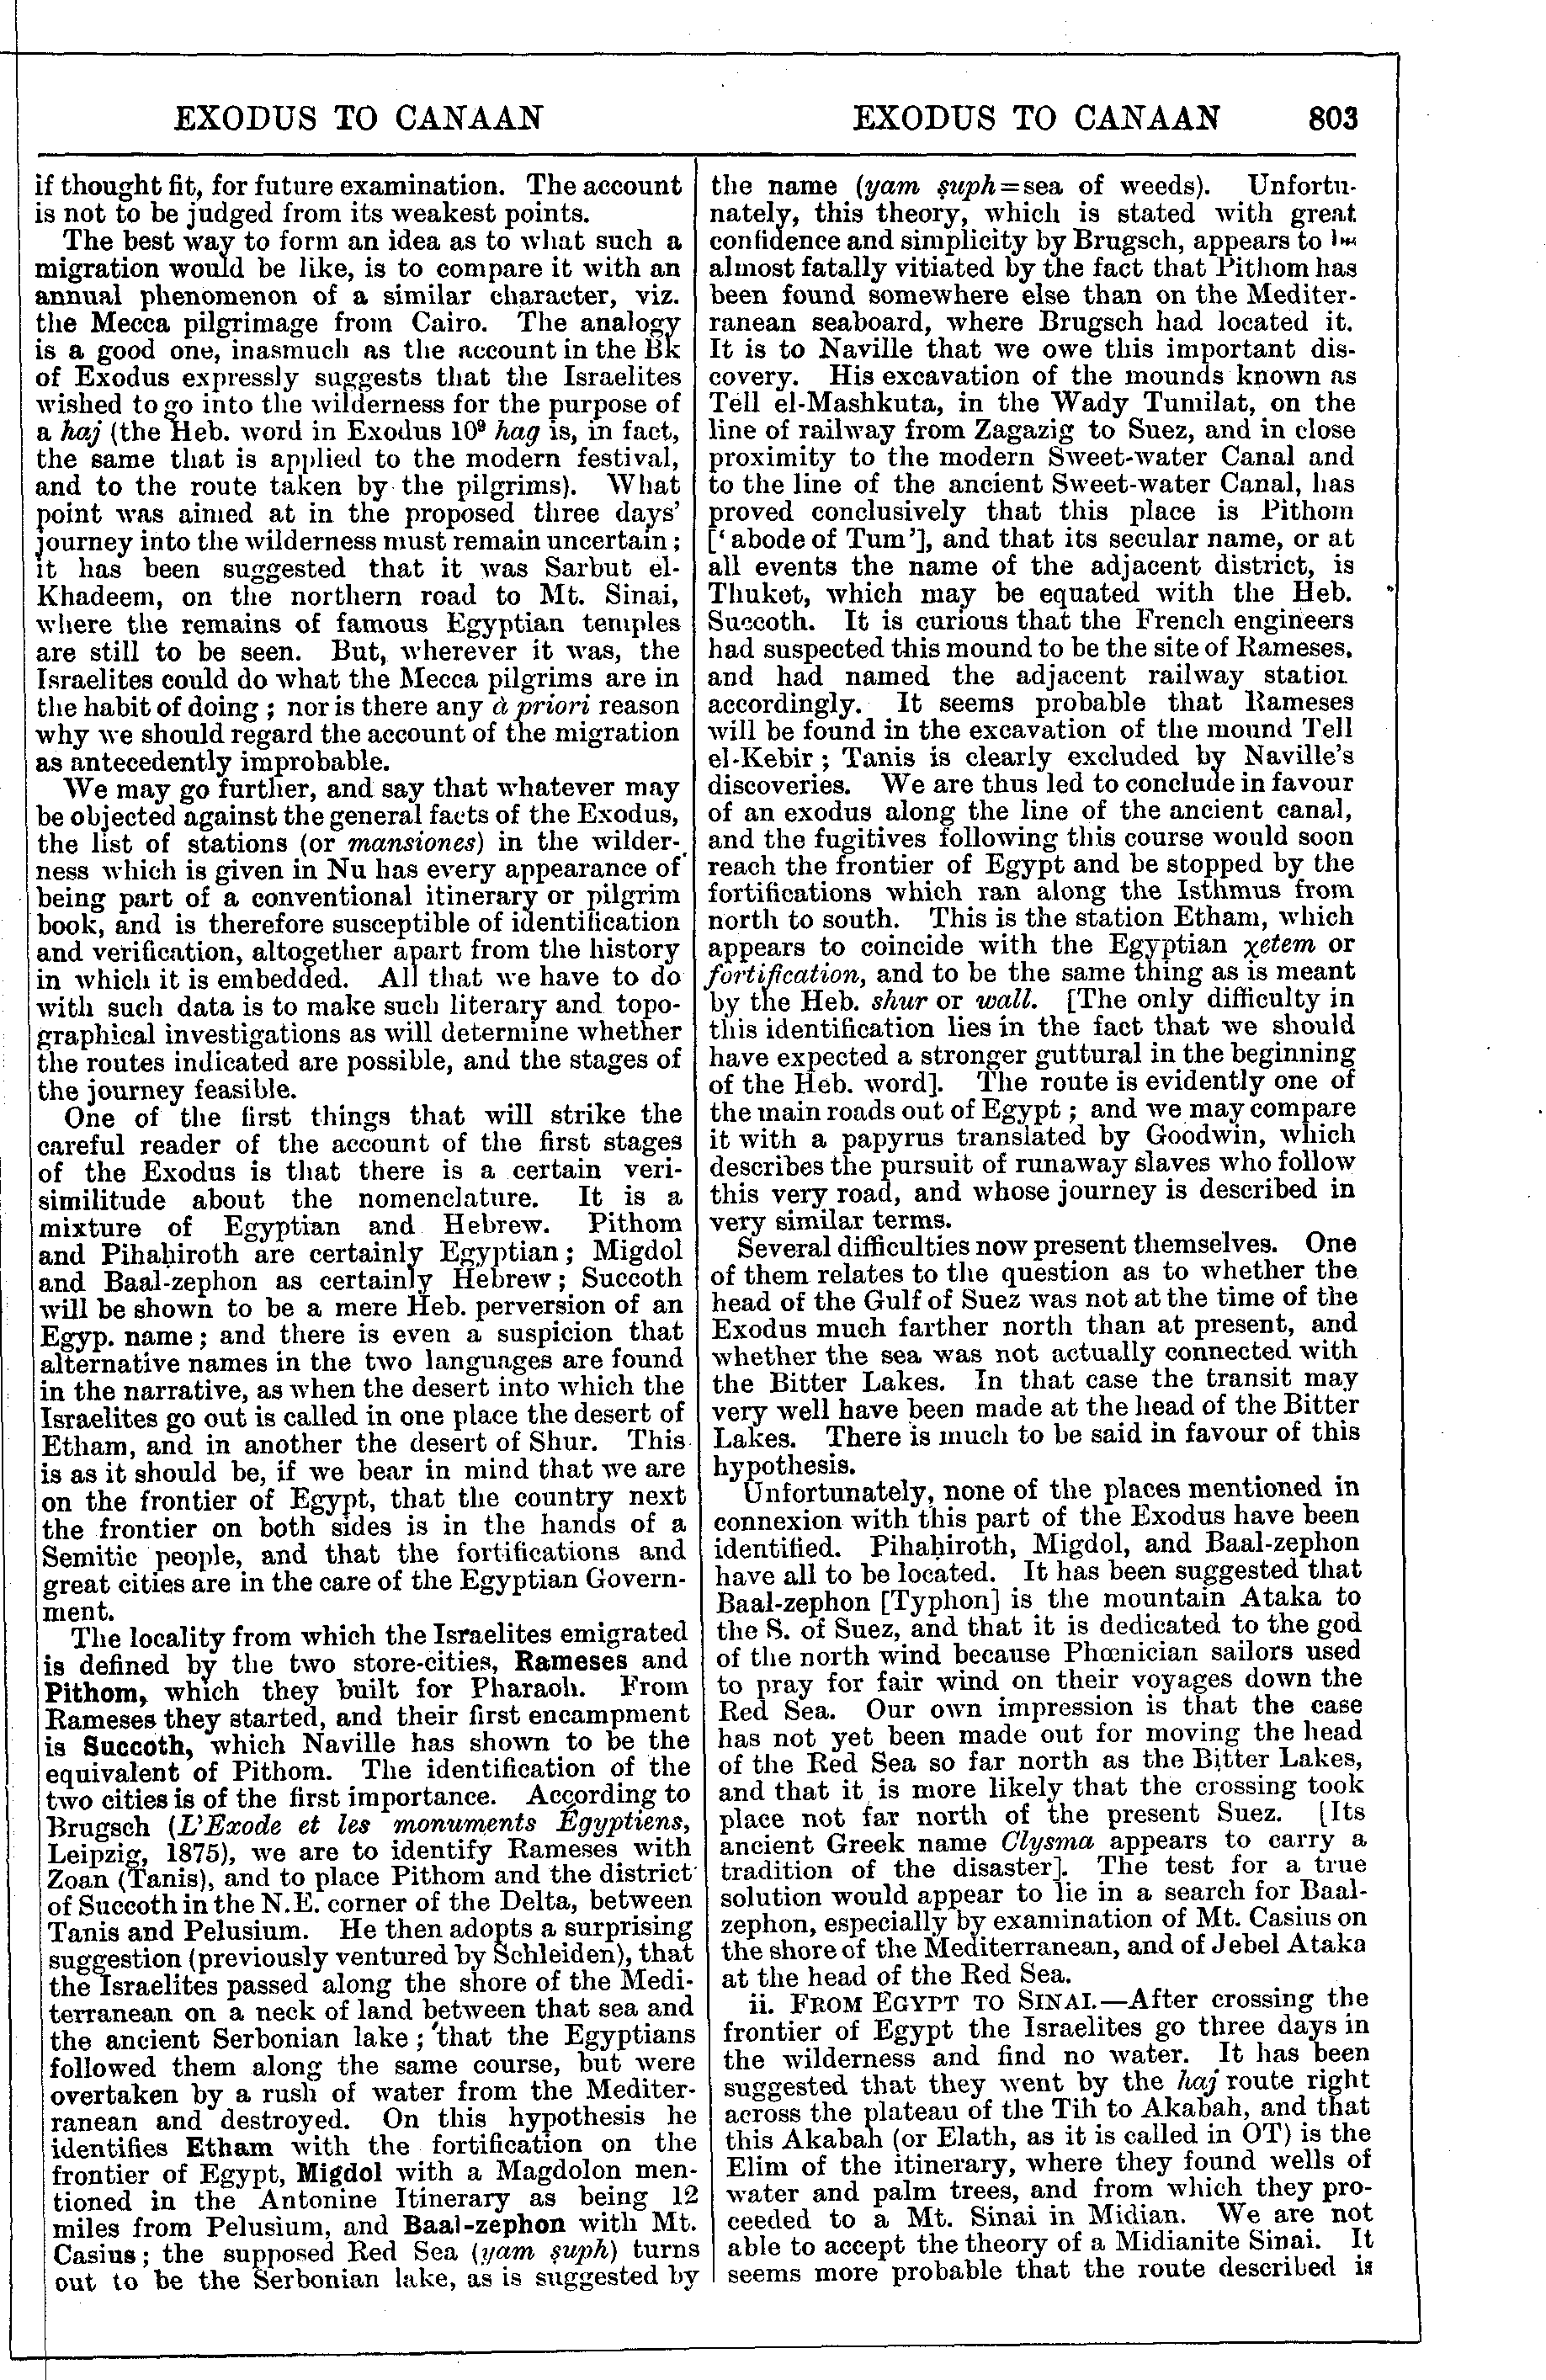 Image of page 803